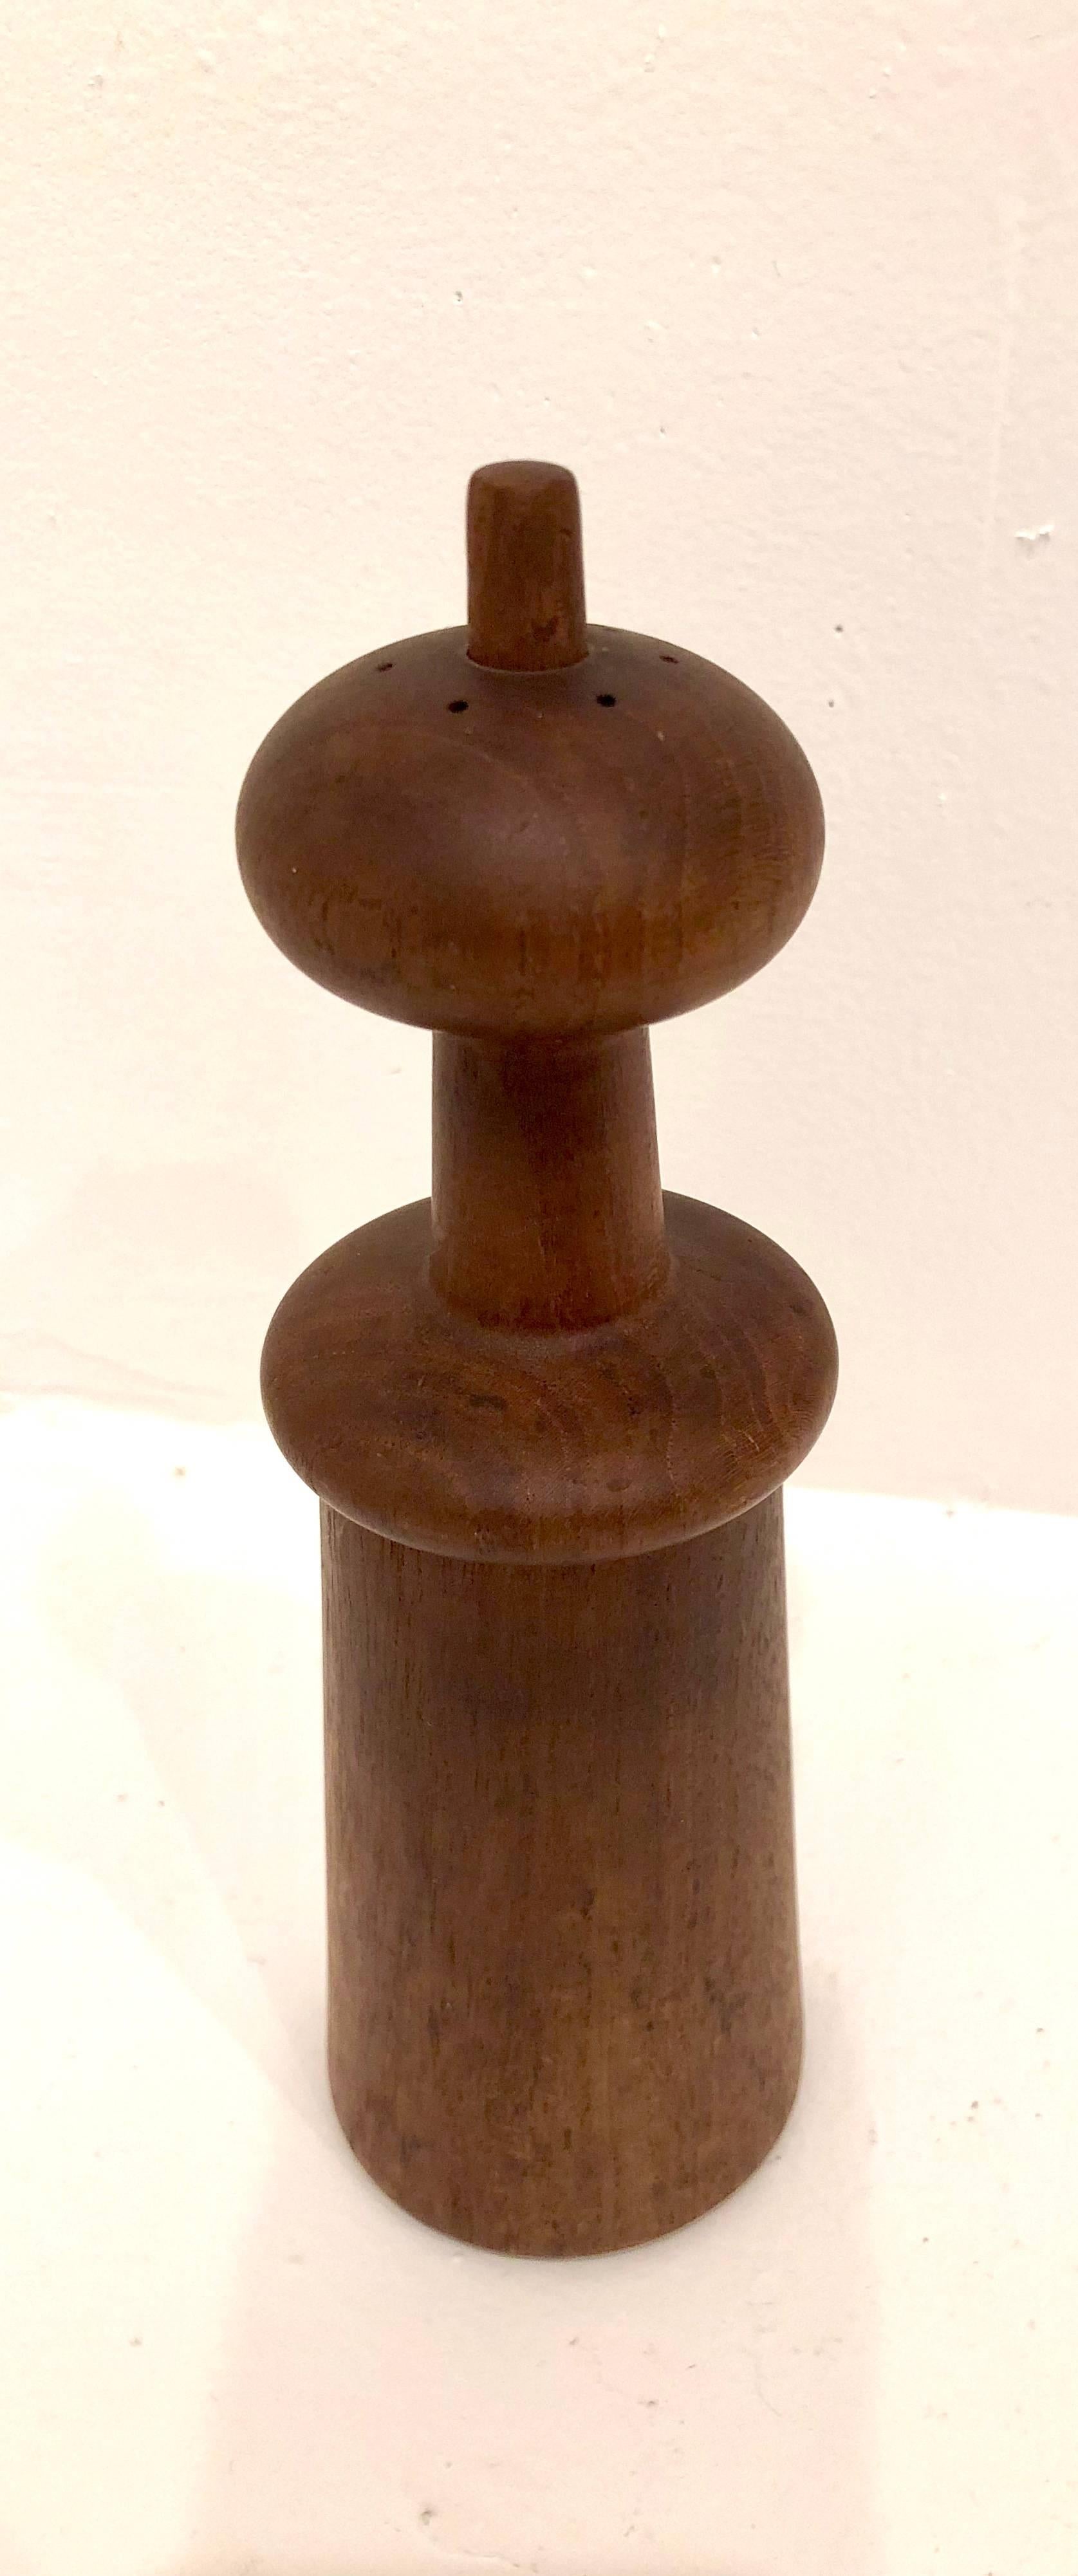 Early production on this solid teak salt and peppermill designed by Quistgaard for Dansk, beautiful design.